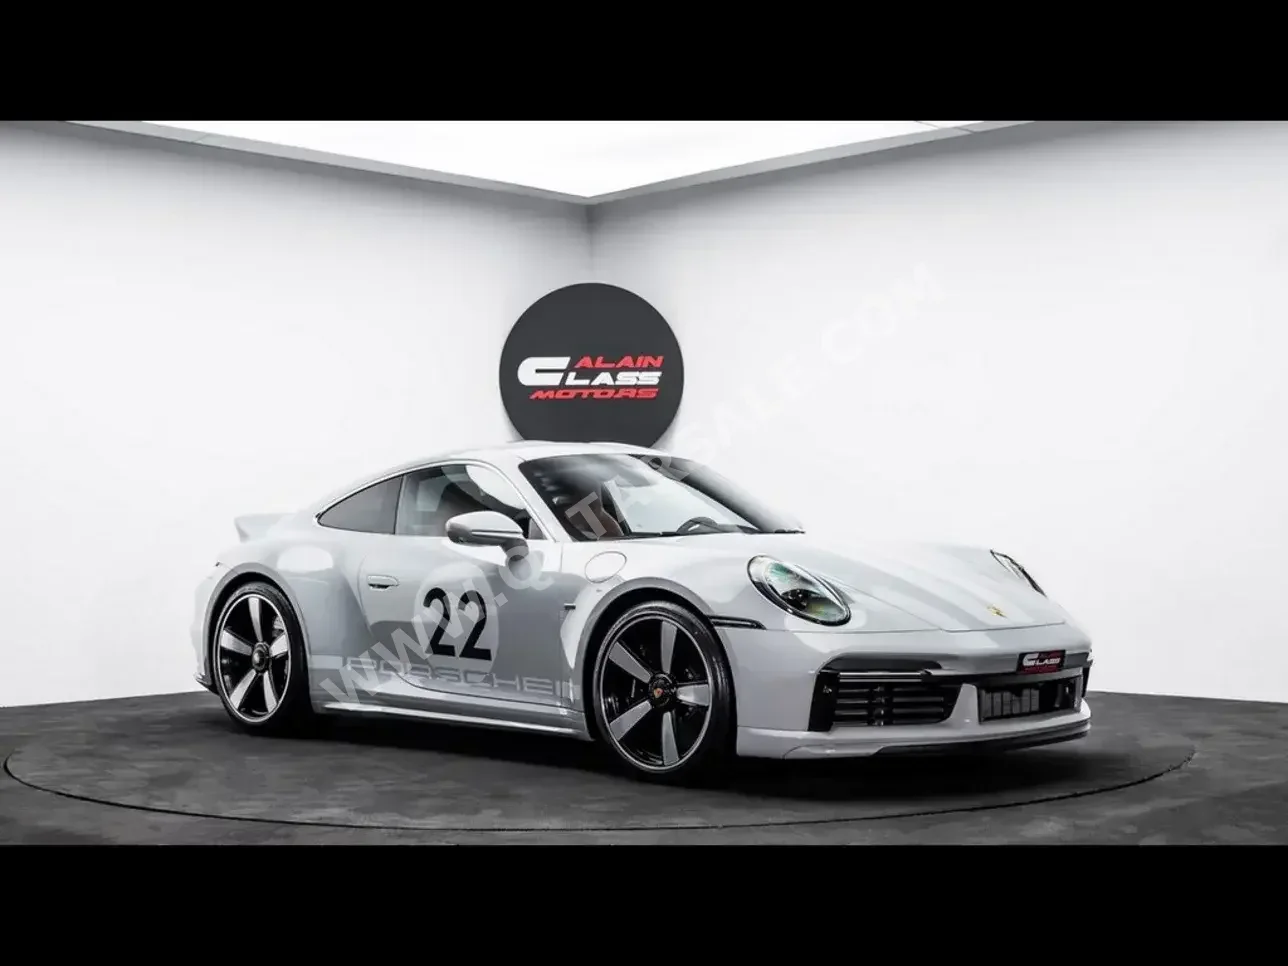 Porsche  911  Sport Classic  2023  Automatic  1,450 Km  6 Cylinder  Rear Wheel Drive (RWD)  Coupe / Sport  White  With Warranty